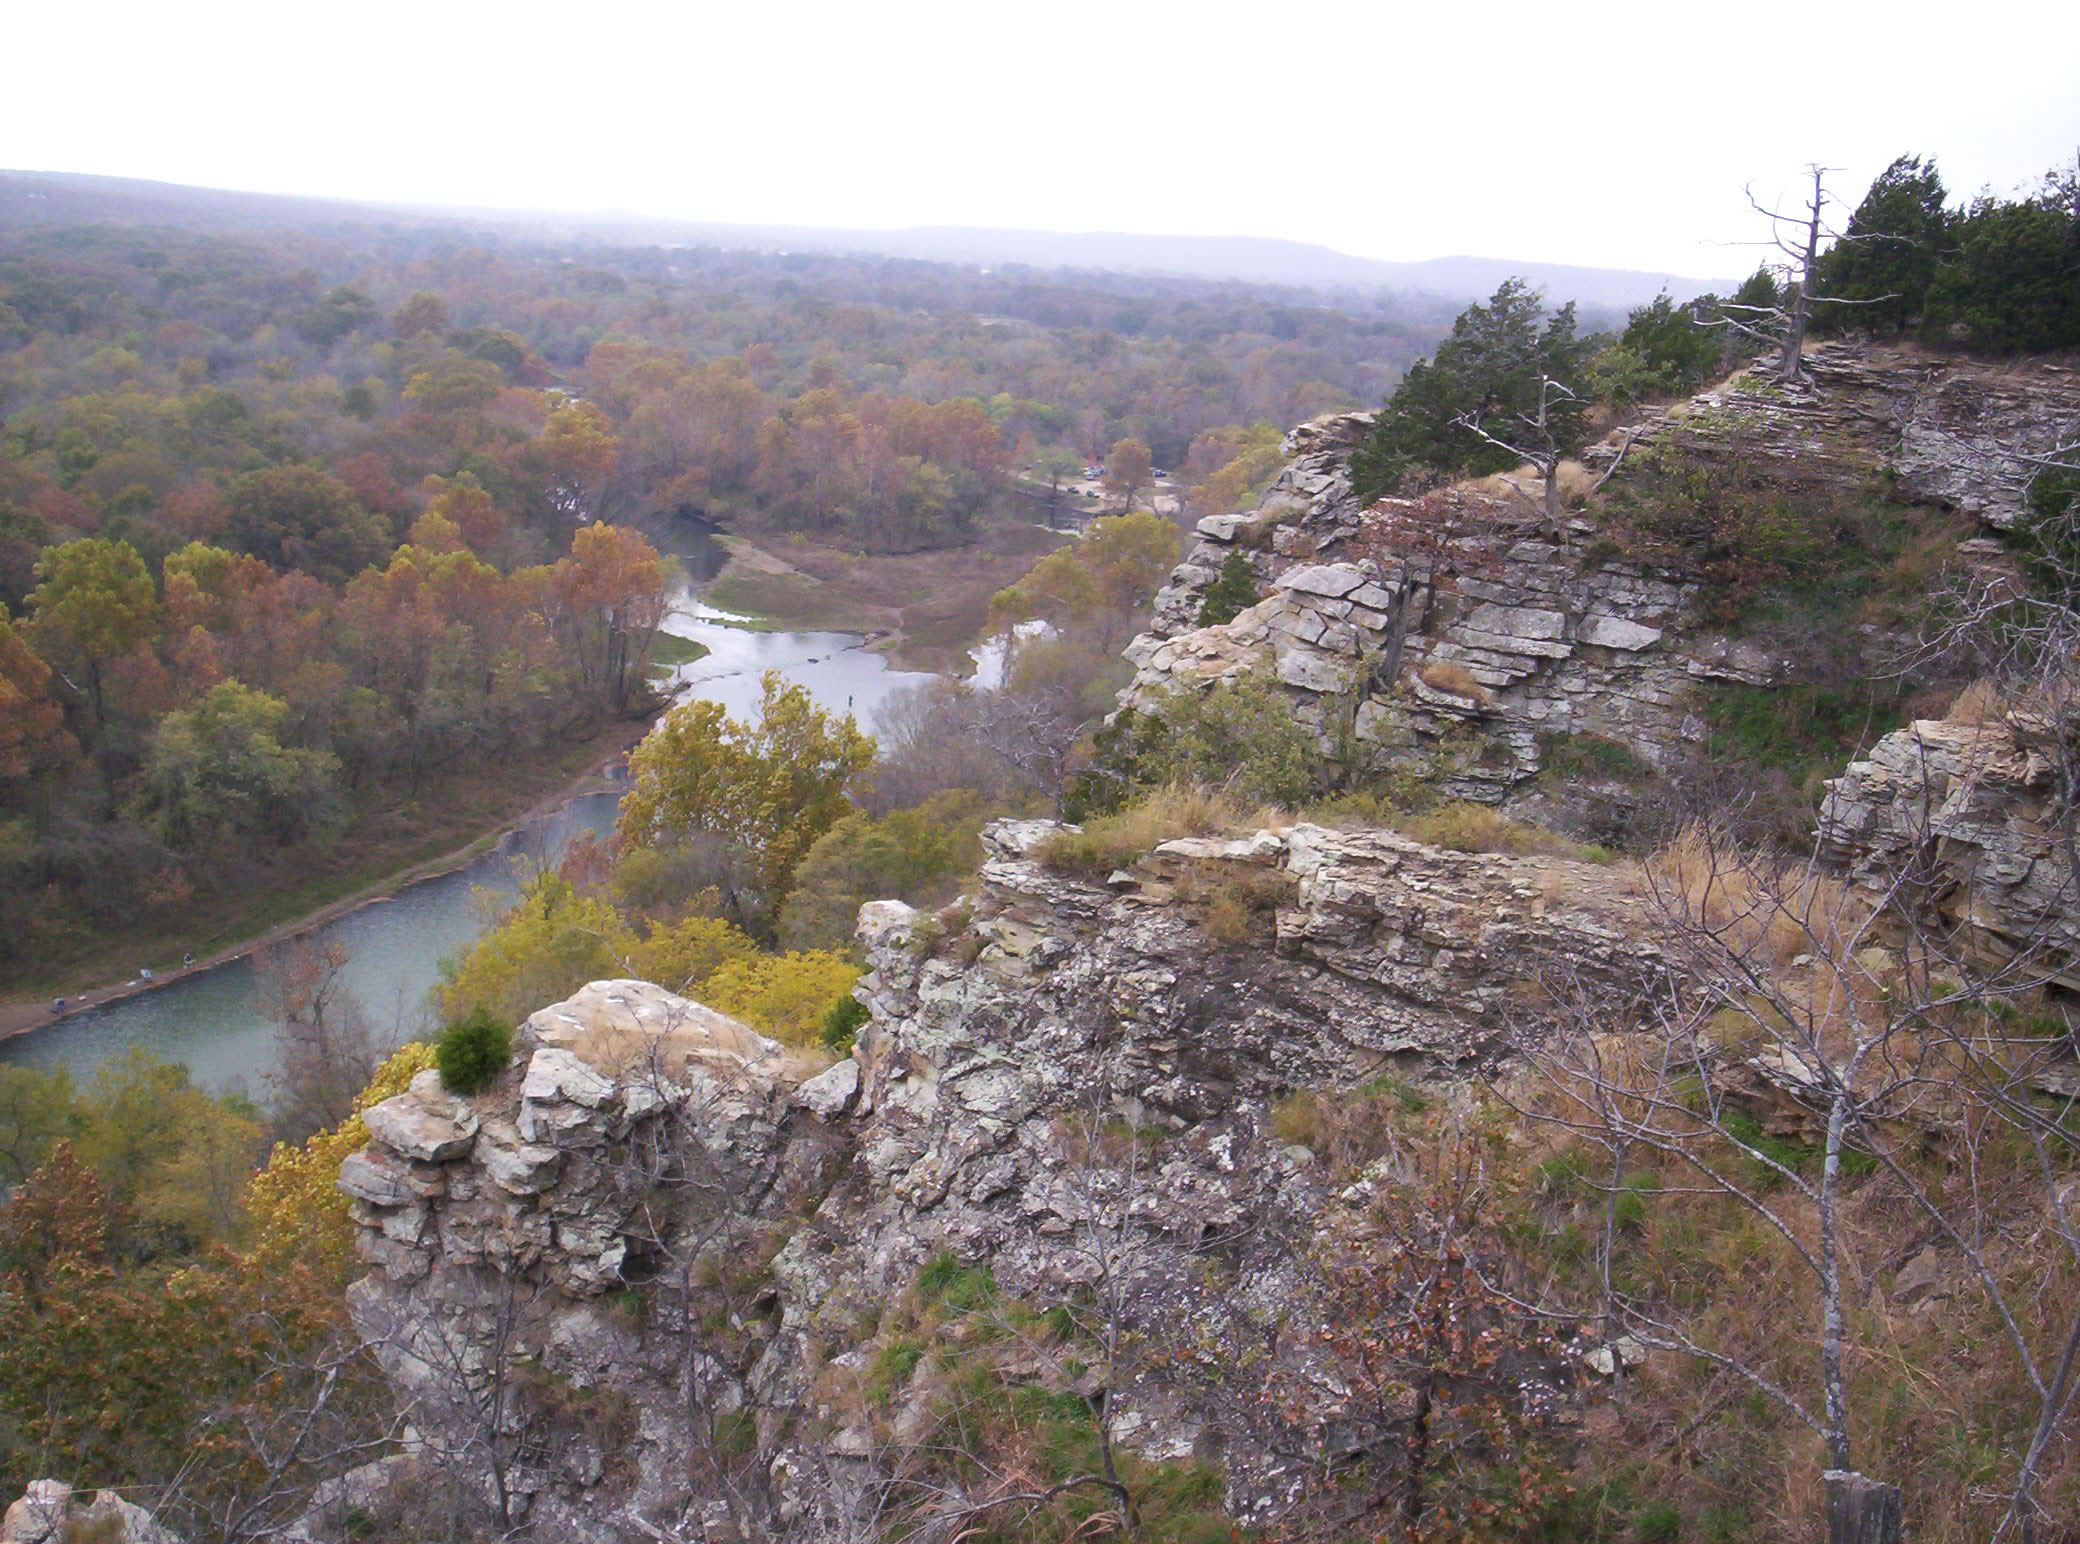 ozark mountains where the red fern grows